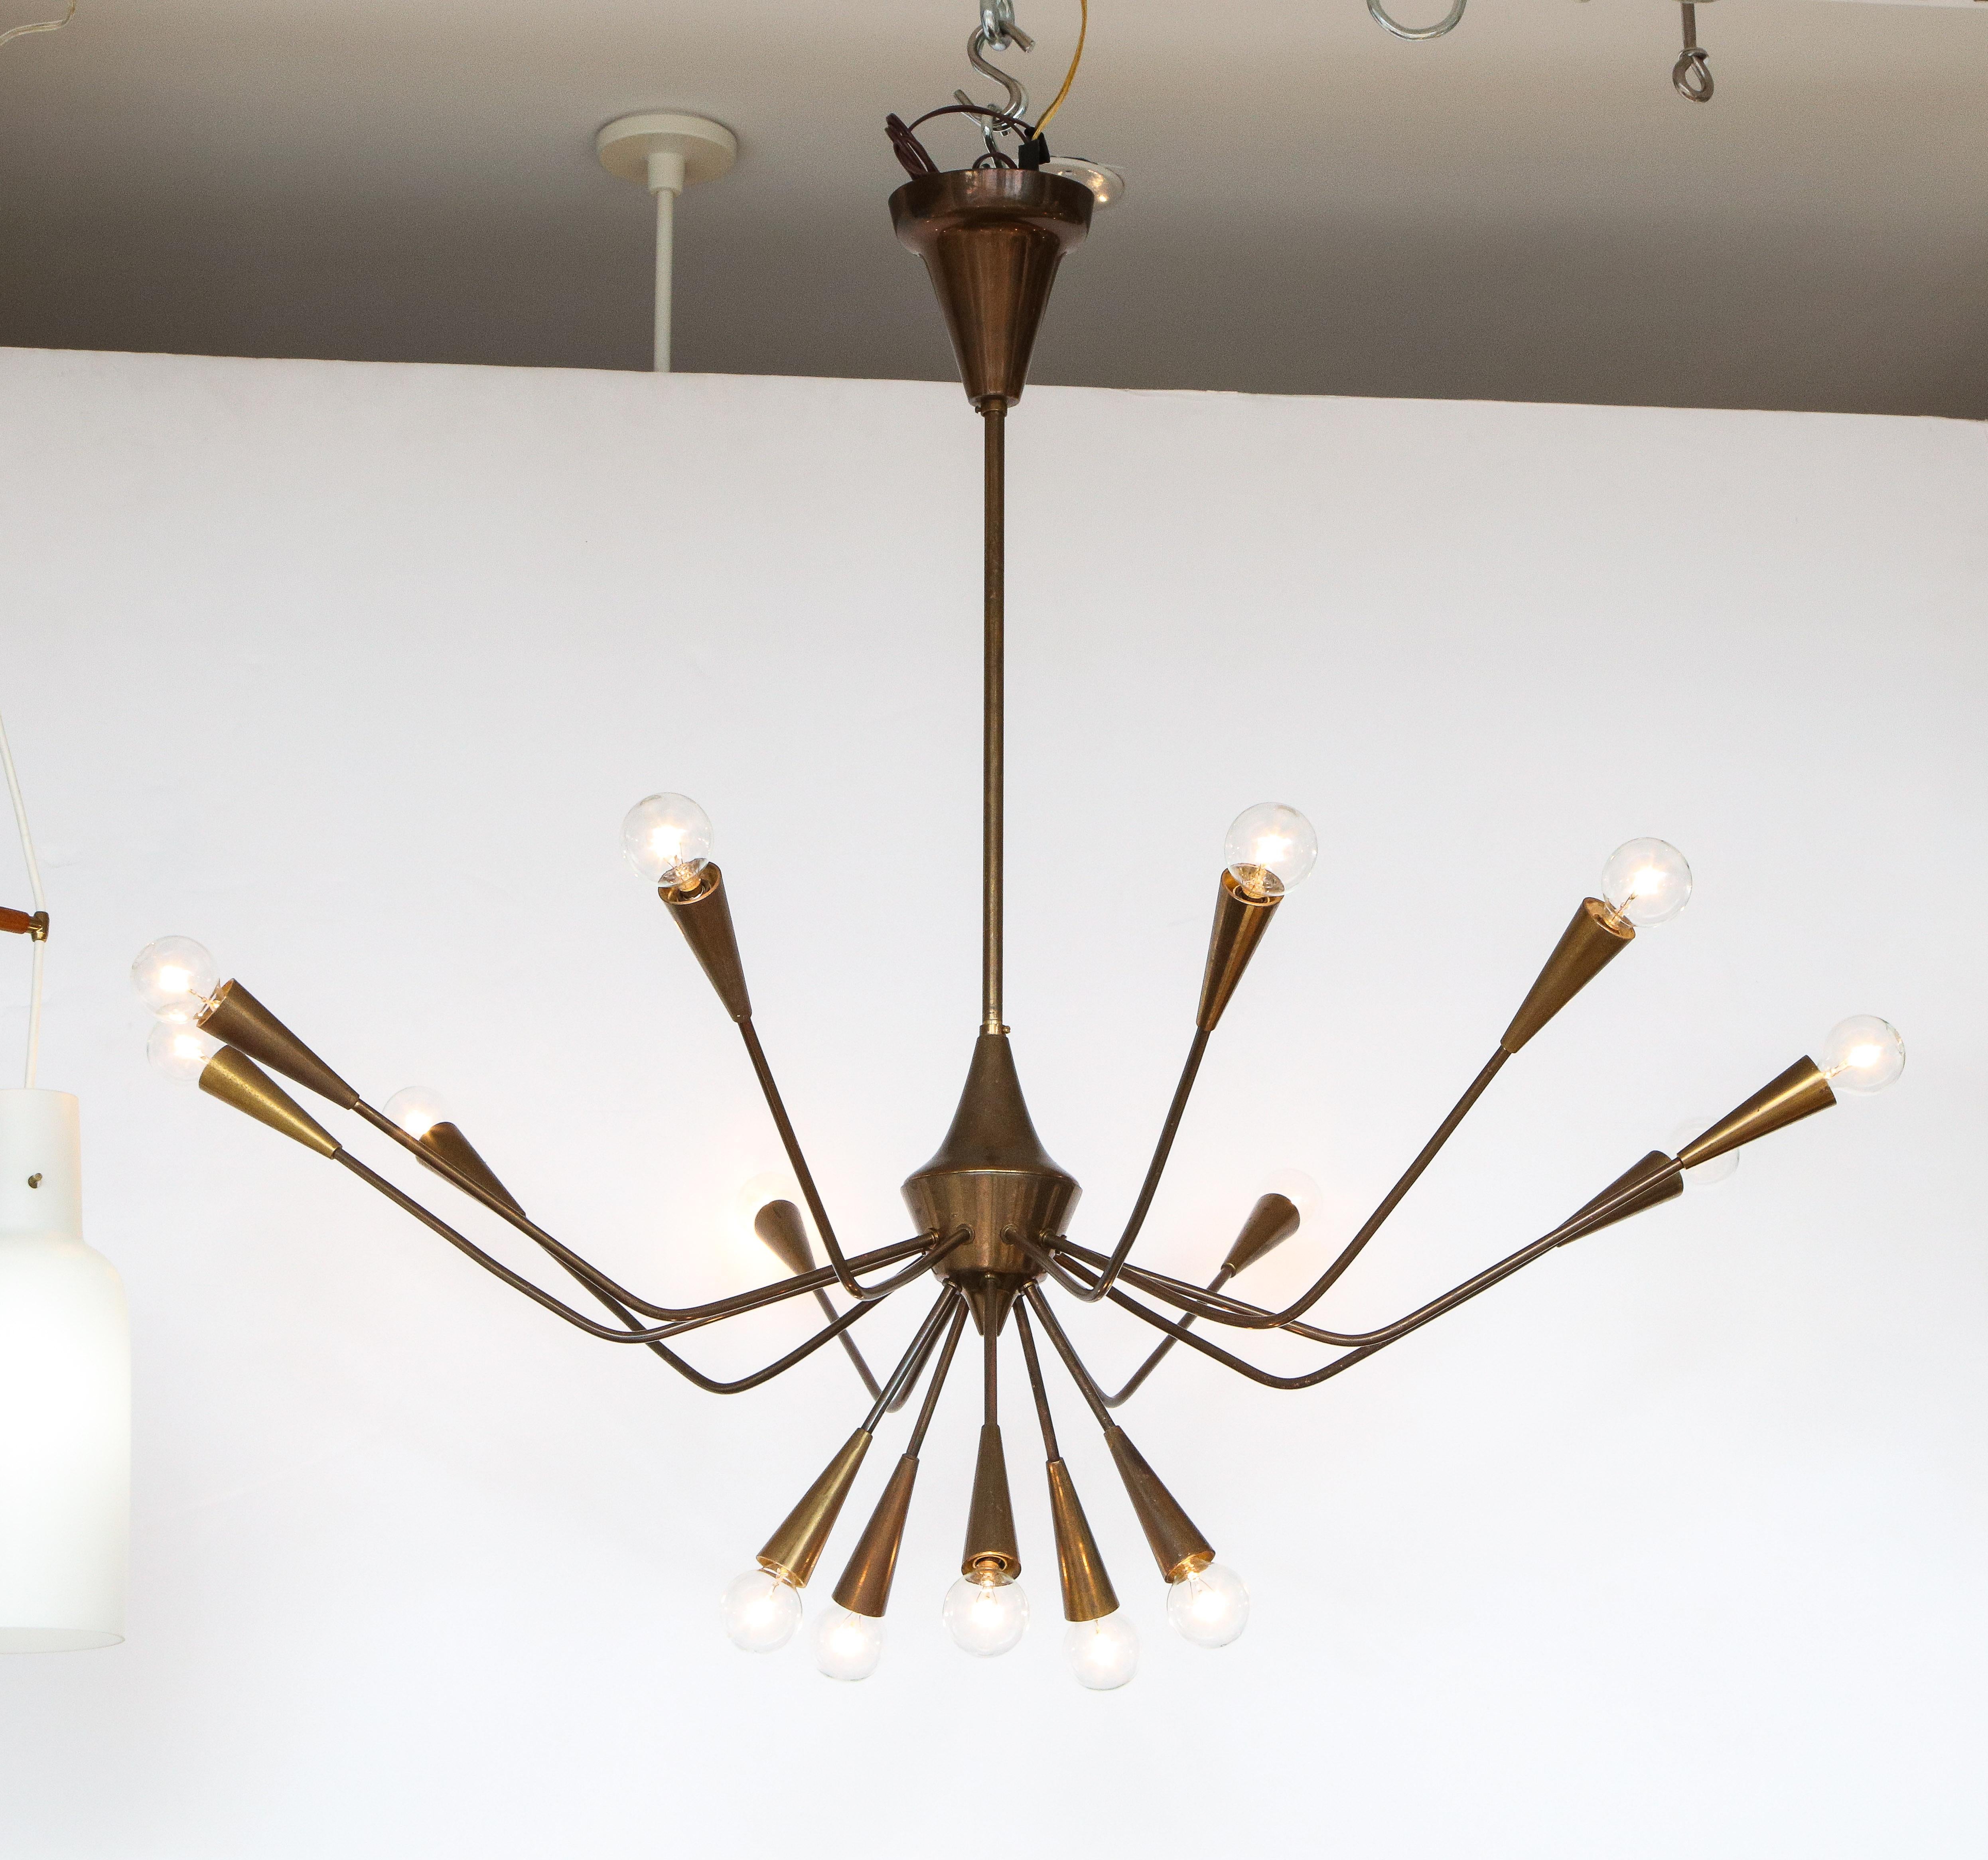 Stunning 1960's modernist patinated brass 15 arm chandelier designed by Oscar Torlasco for Lumi, in vintage original condition with beautiful patina, the chandelier have been professionally rewired and is ready to use.